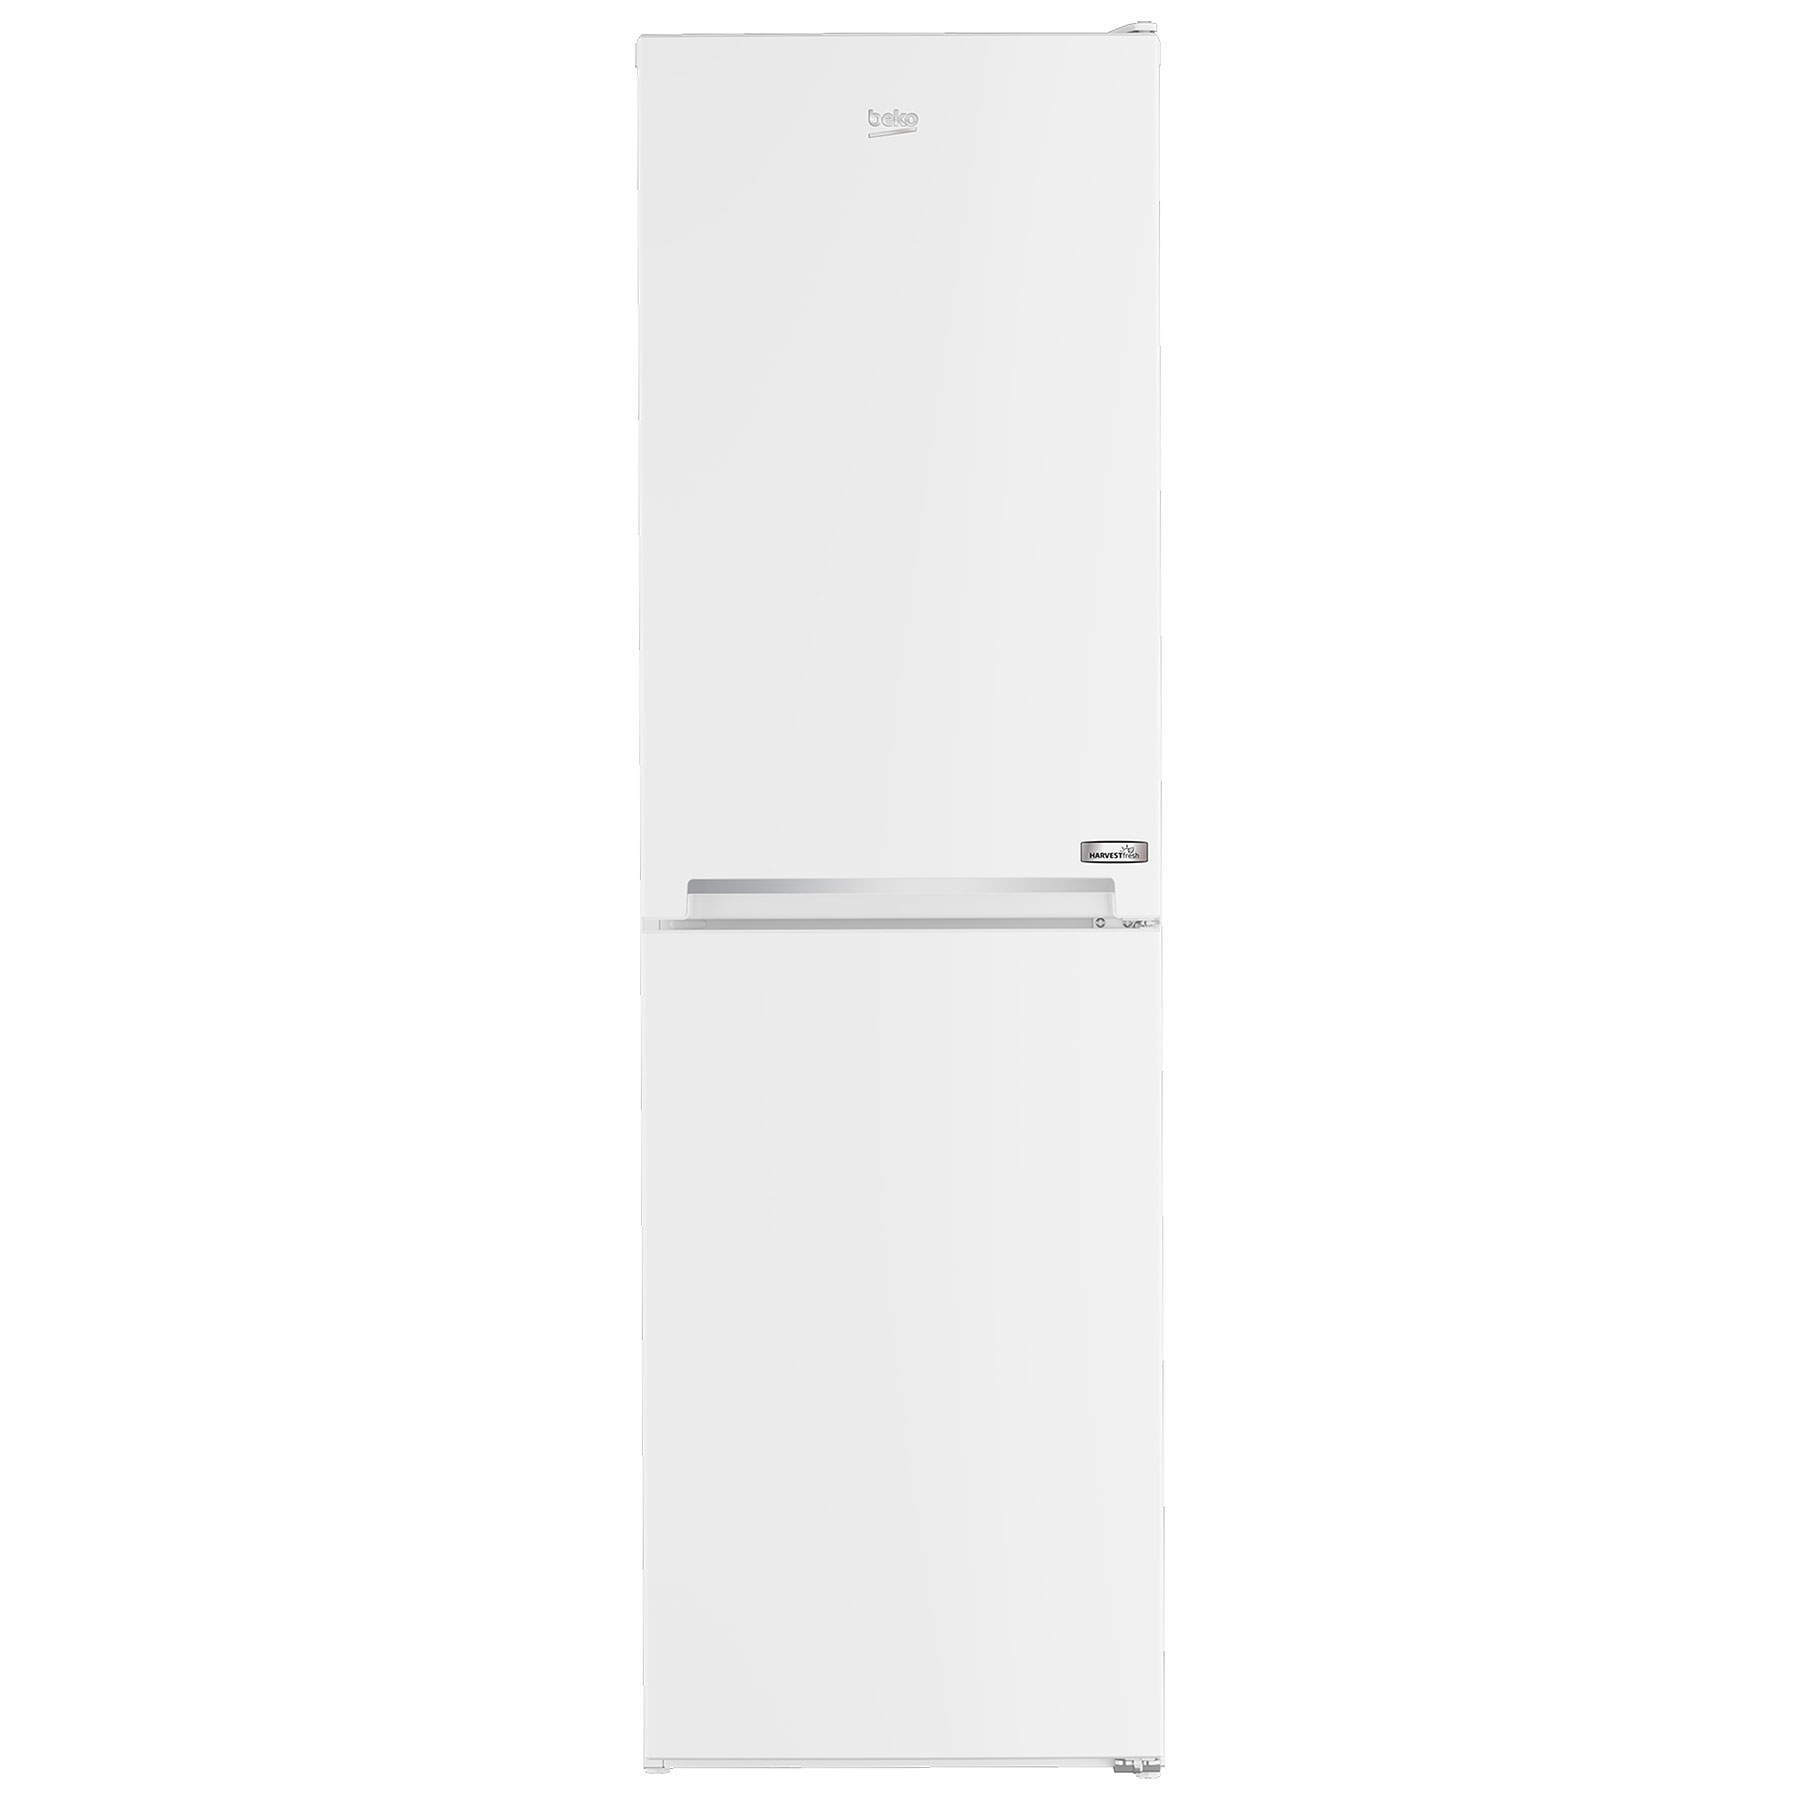 Image of Beko CNG4582VW 55cm Frost Free Fridge Freezer in White 1 82m E Rated